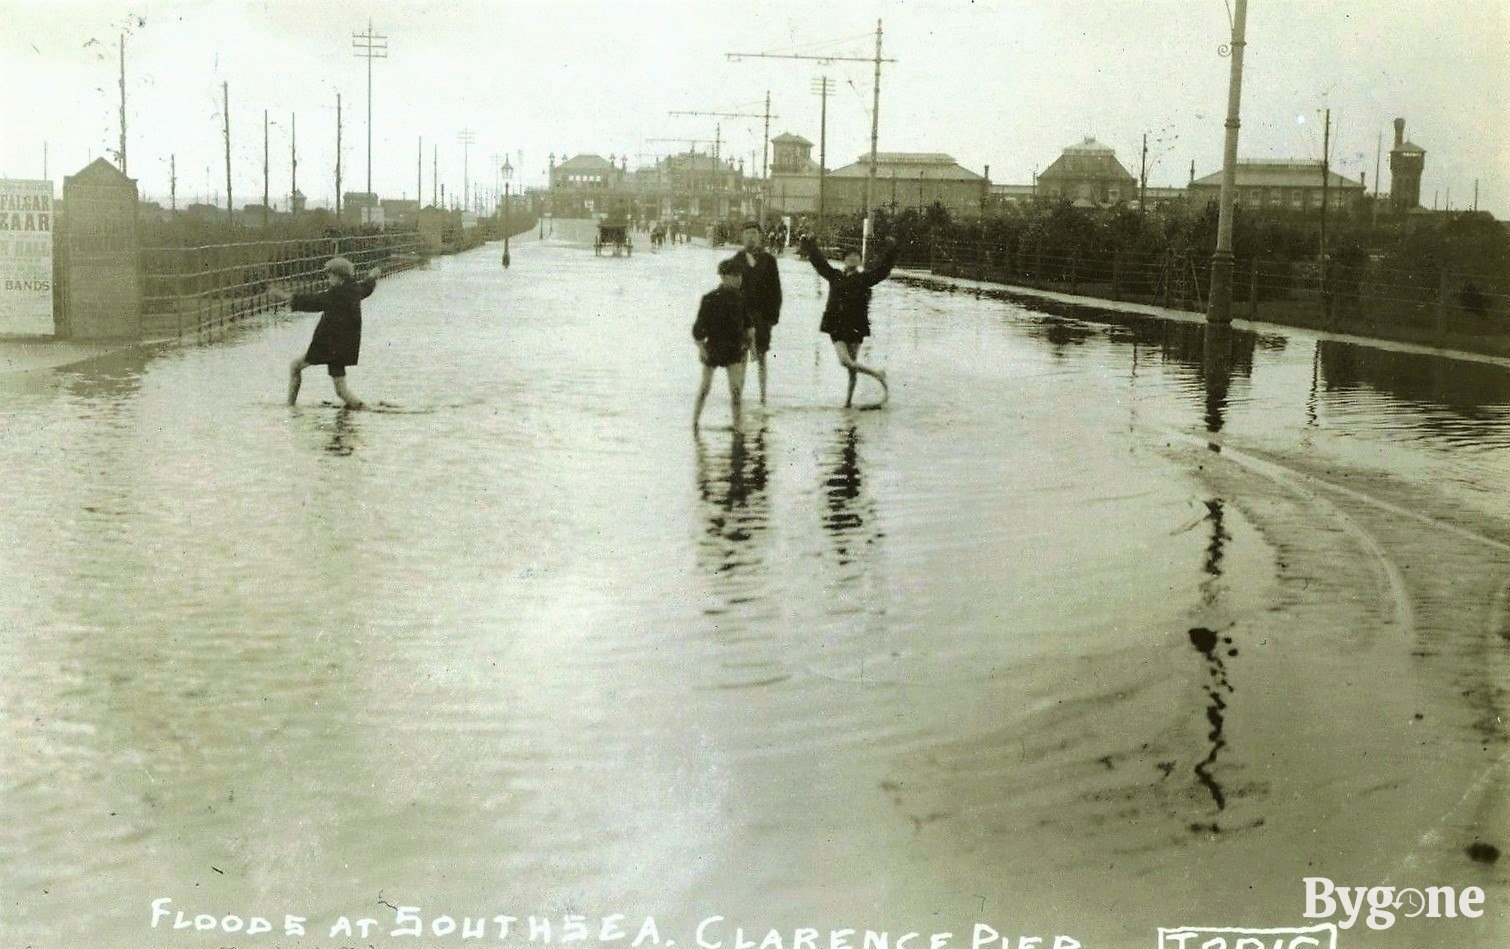 Flooding at Southsea Seafront, Clarence Pier